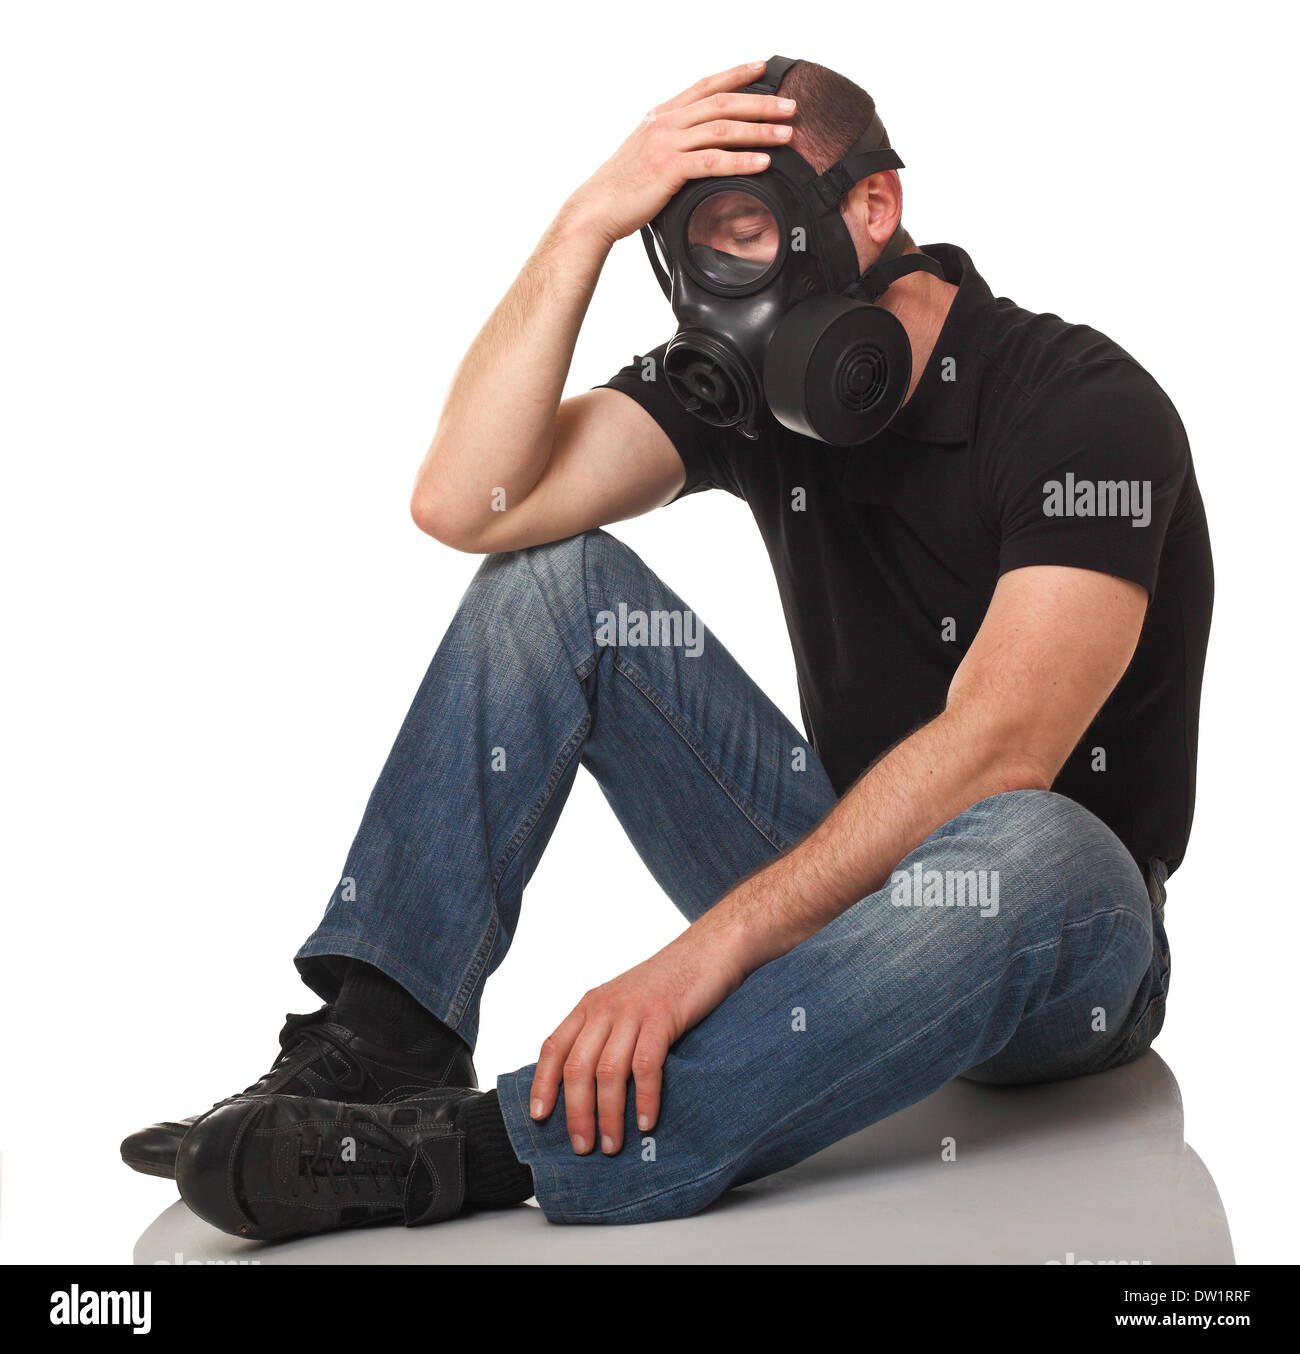 man with gas mask Stock Photo